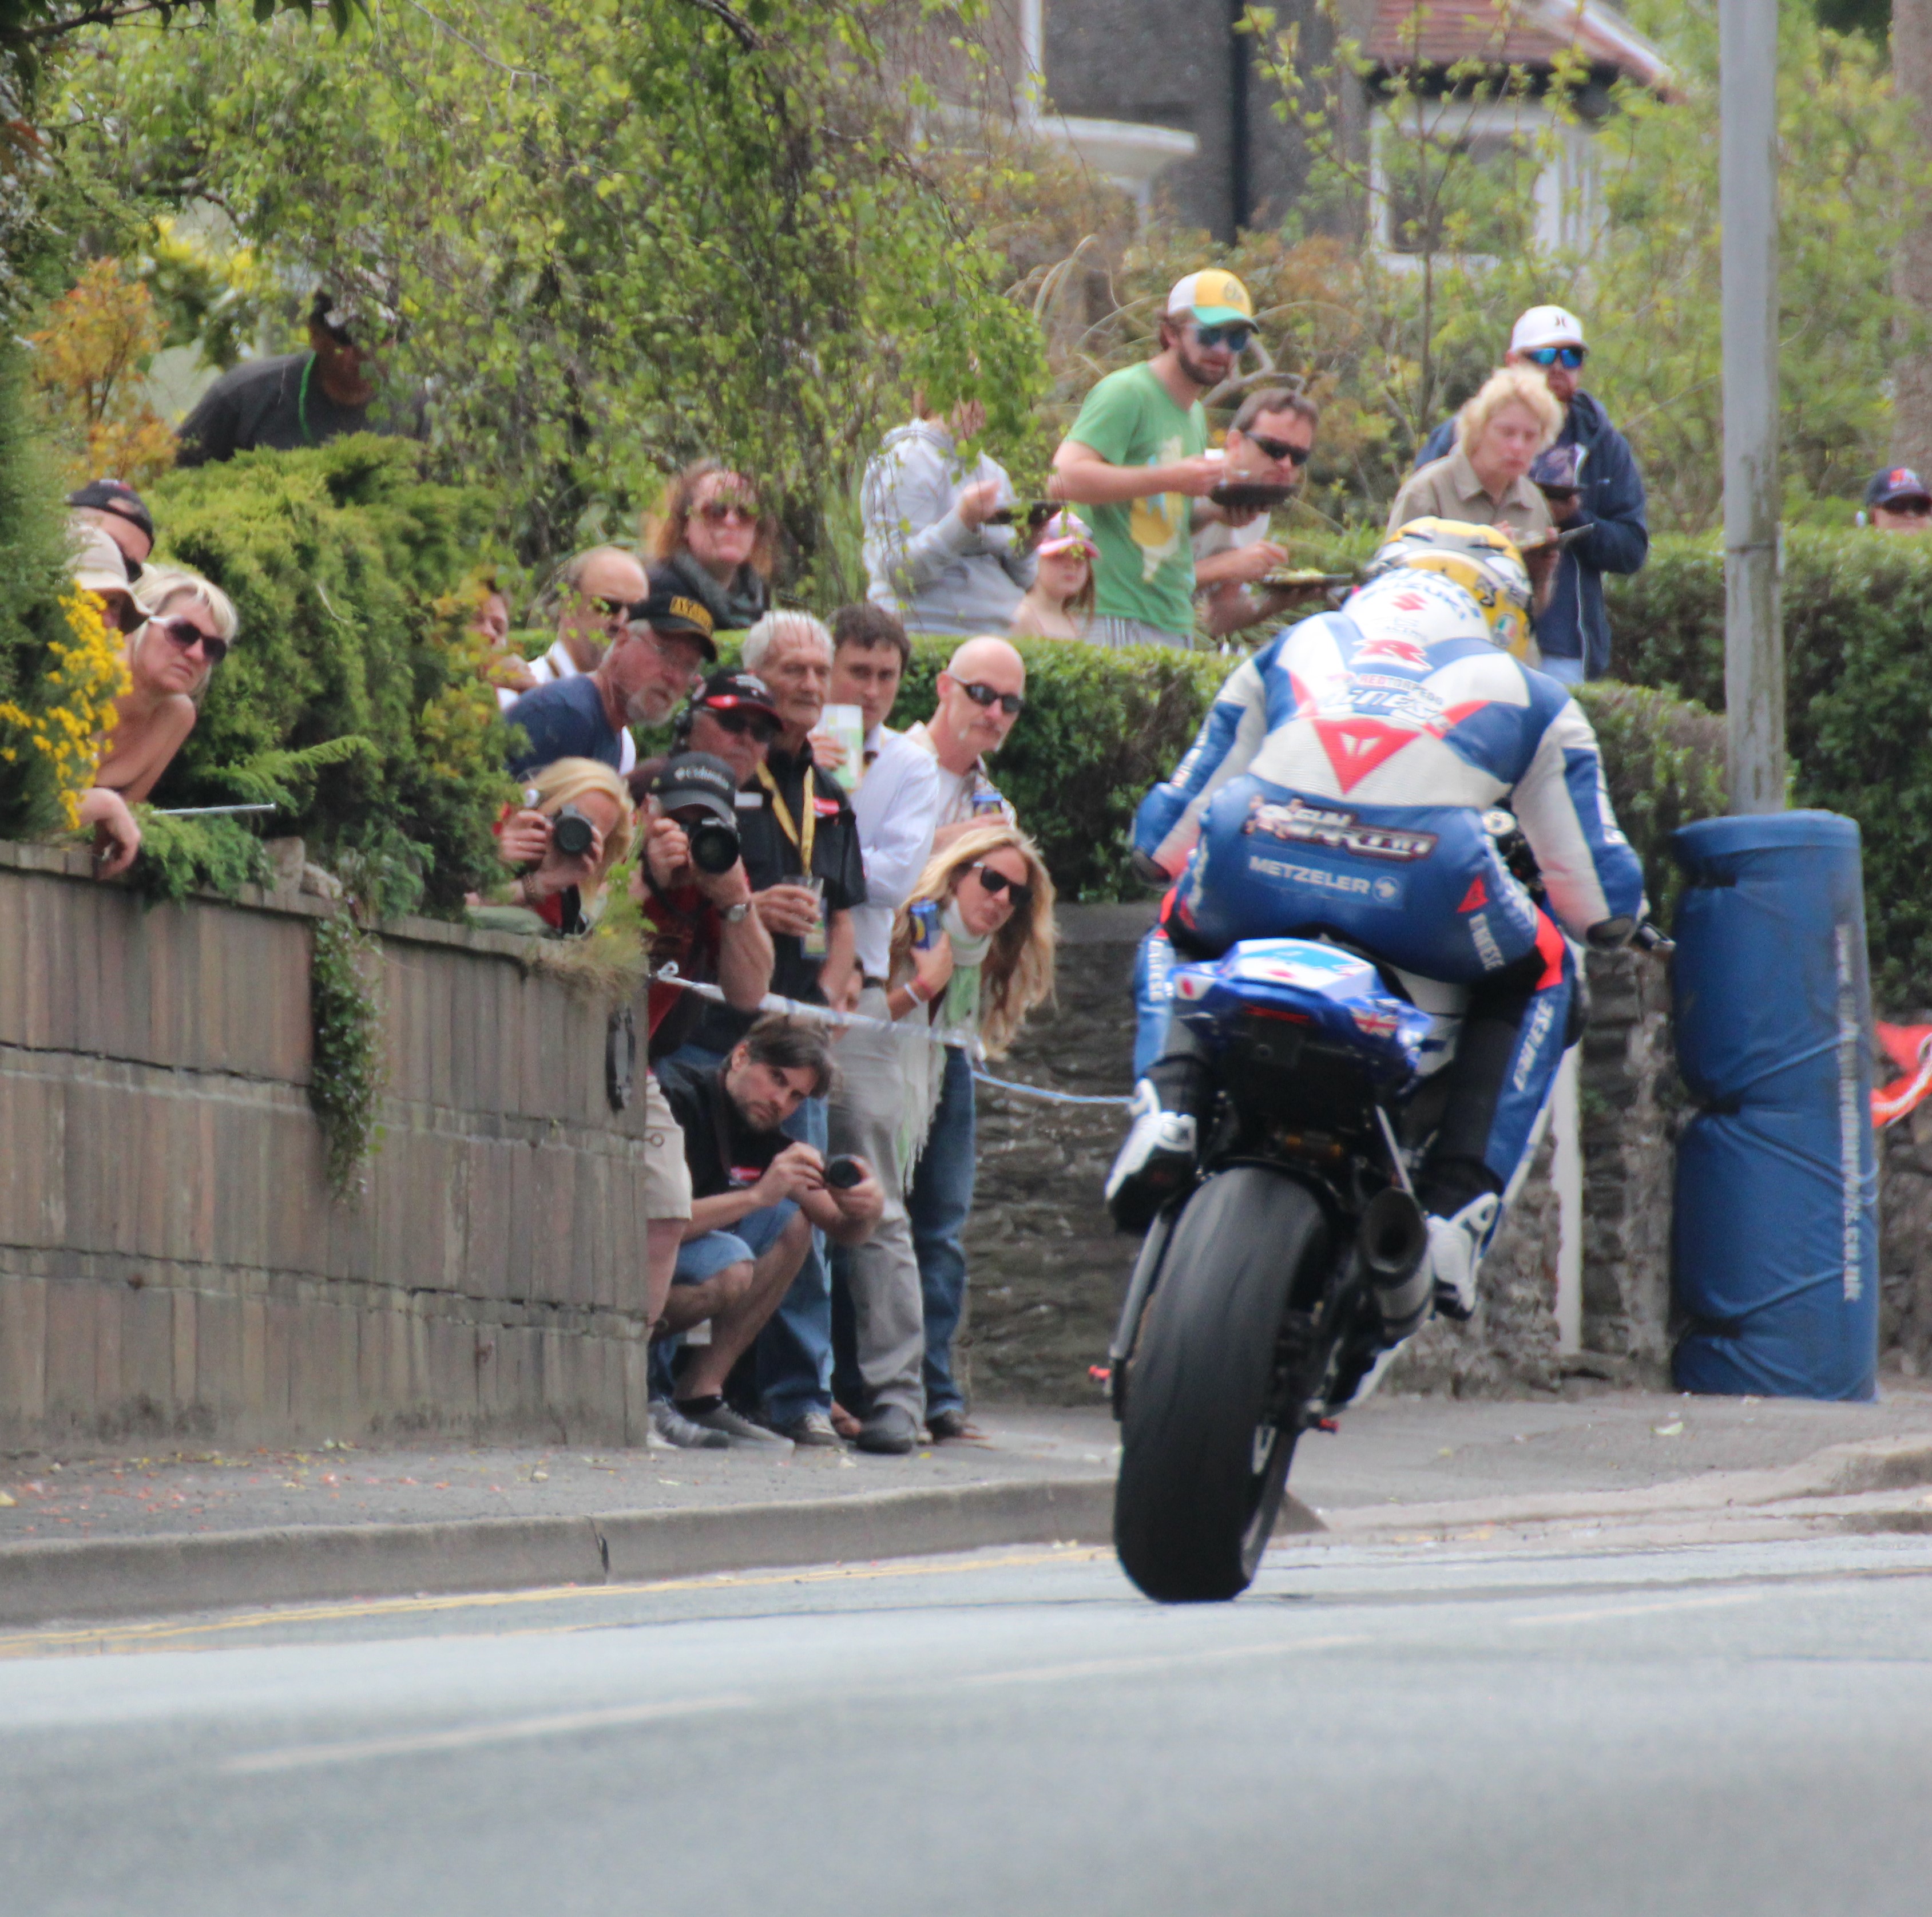 11 unusual and wacky races in the Isle of Man - Not just the TT Races